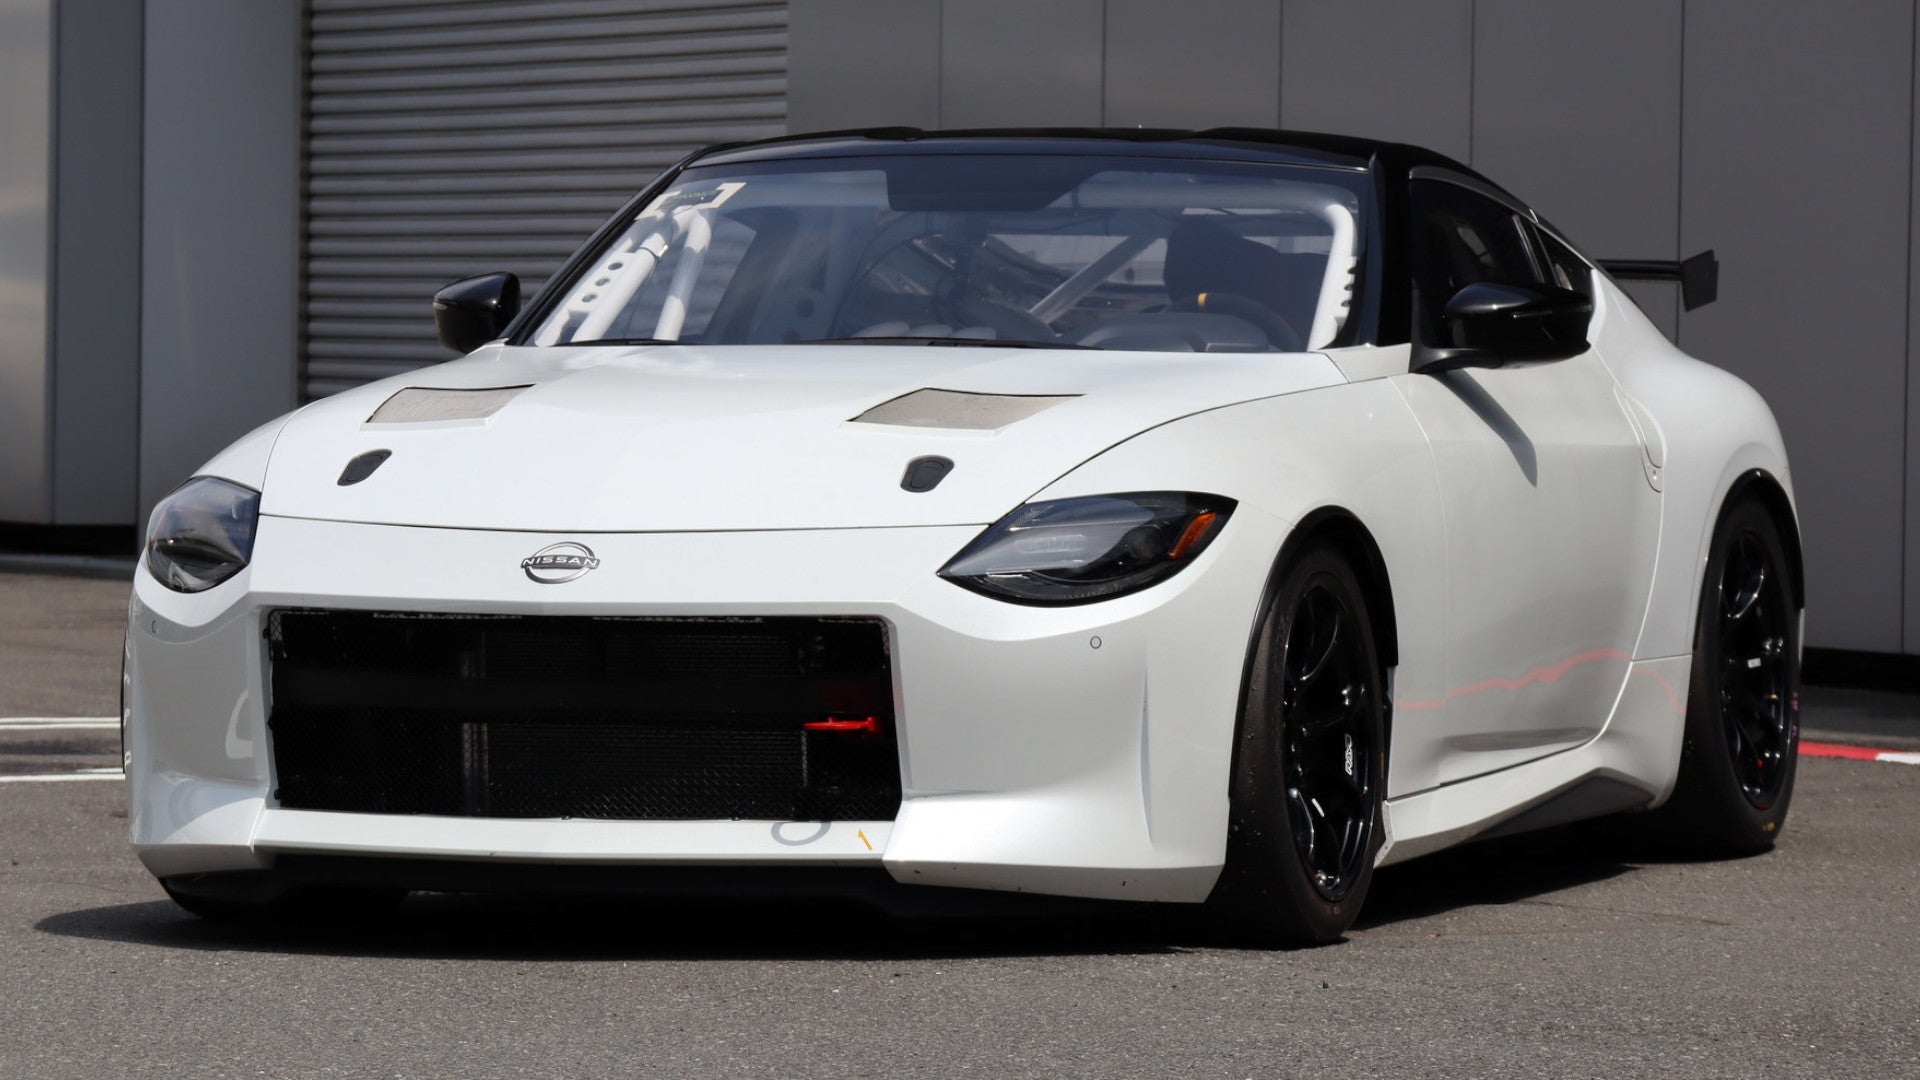 Nissan Z Nismo Race Car Set to Compete at Fuji